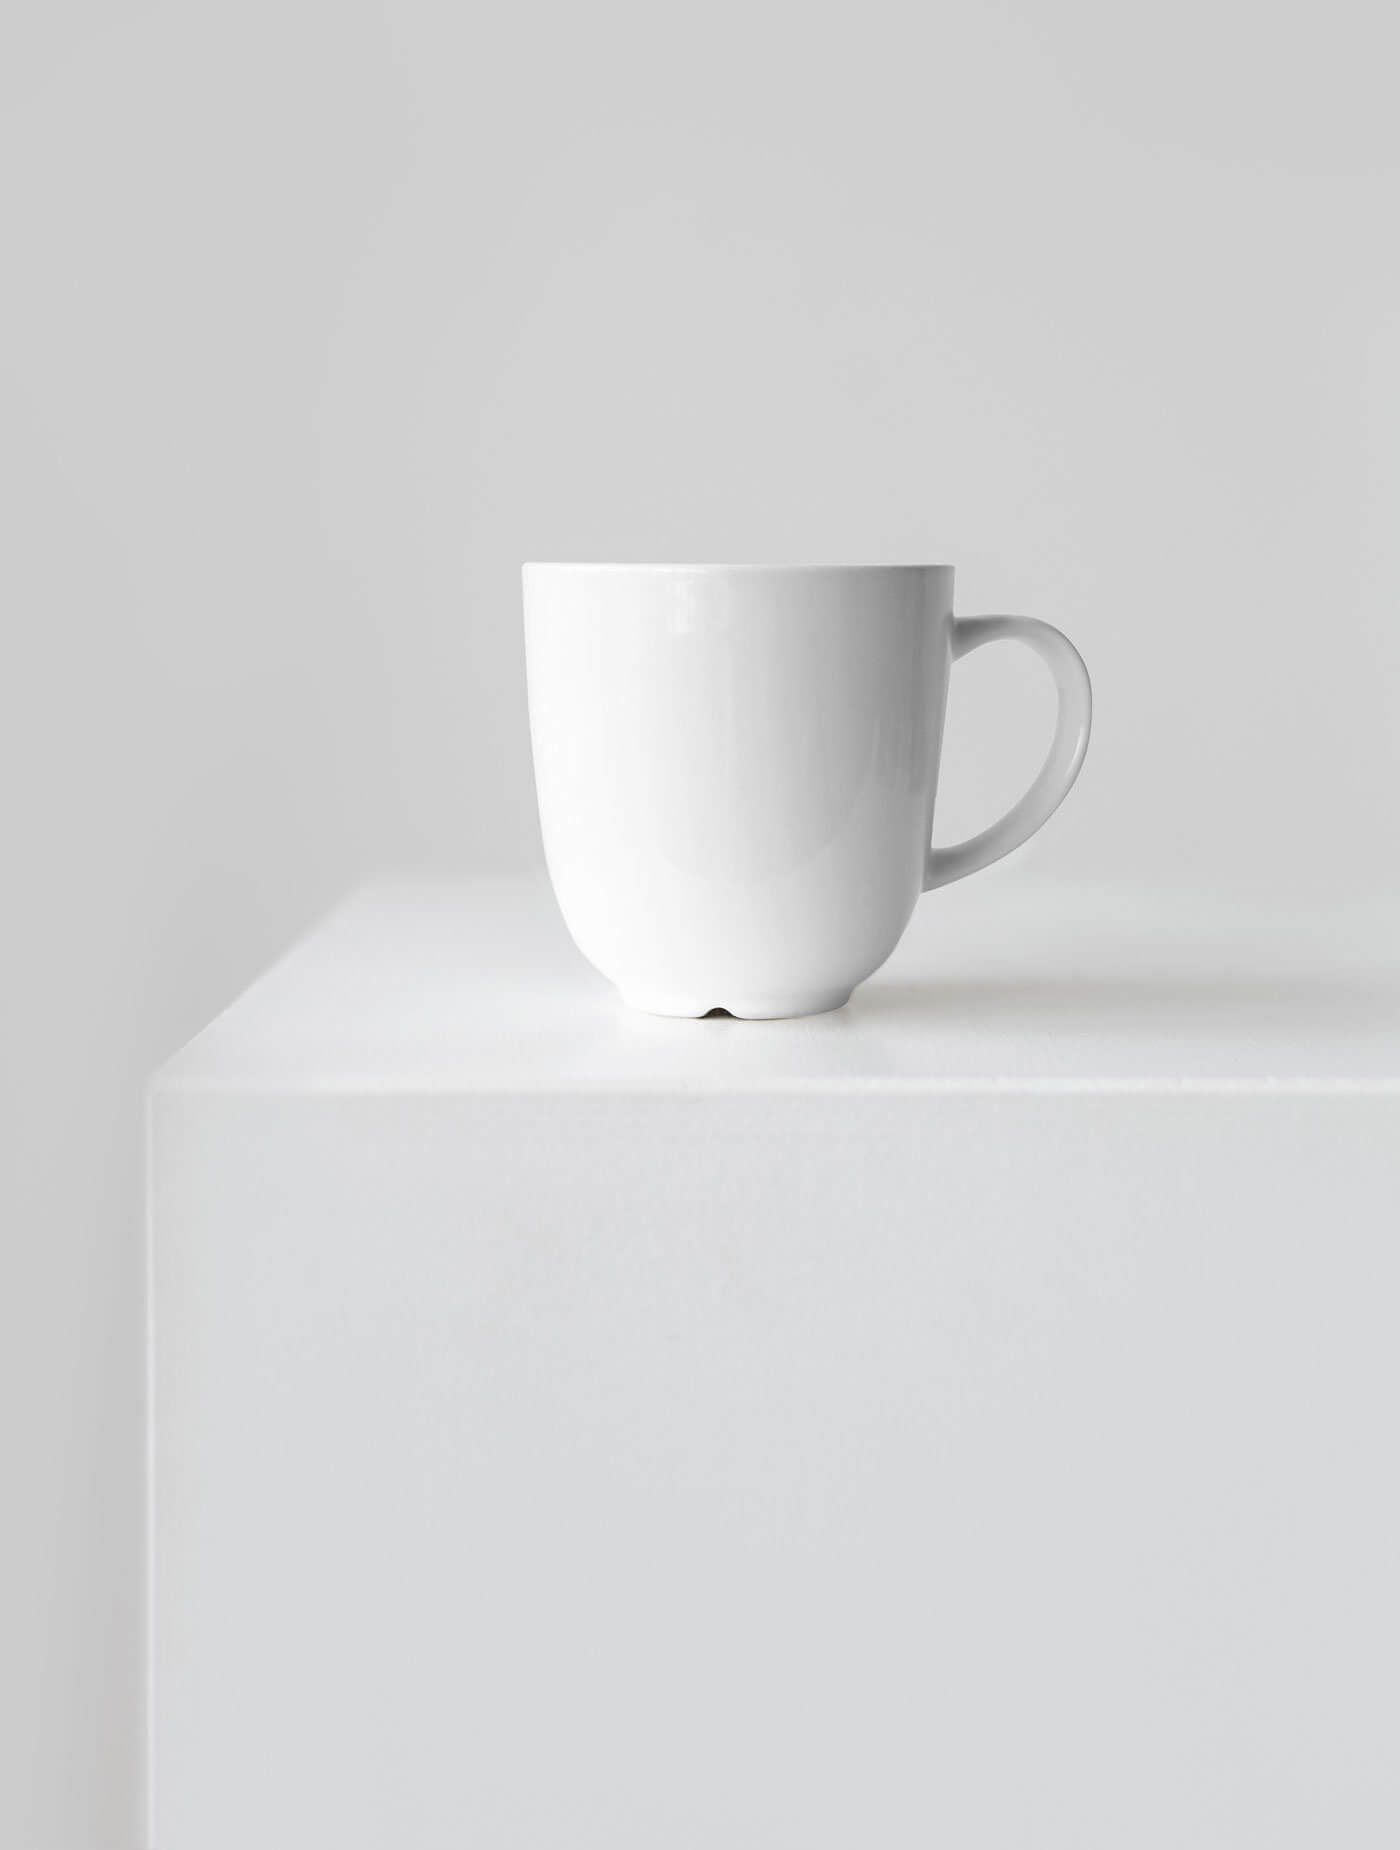 Front View of a Ceramic Mug Mockup on a Cube 